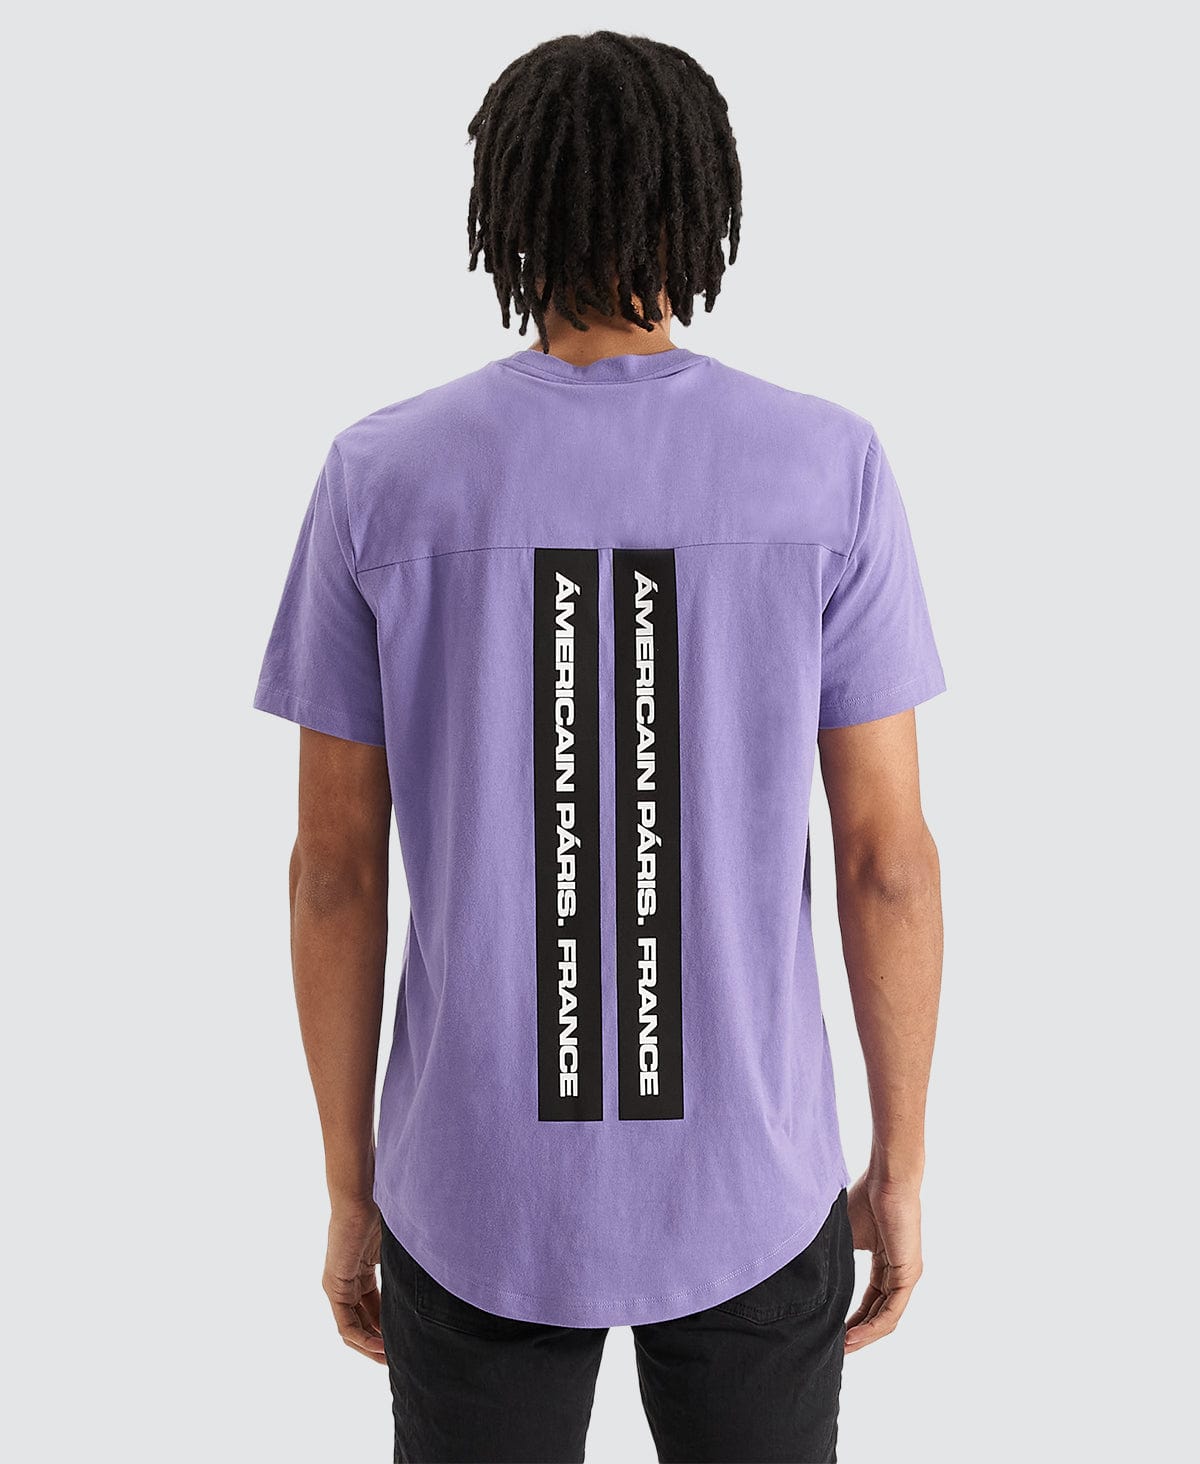 Royale Dual Curved Hem Neverland | – Store in Americain Purple T-Shirt